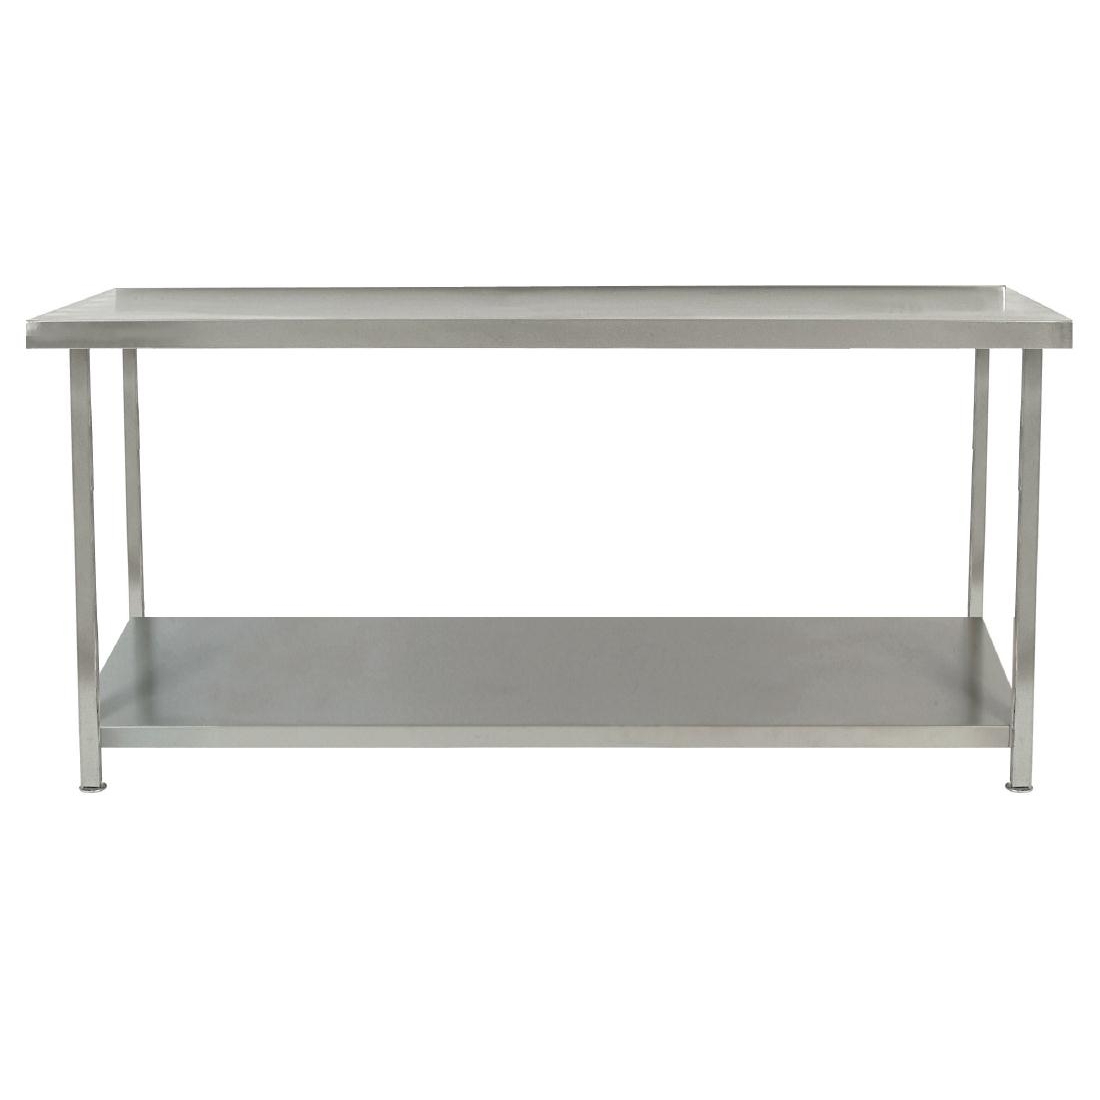 Parry Fully Welded Stainless Steel Centre Table with Undershelf 1800x700mm